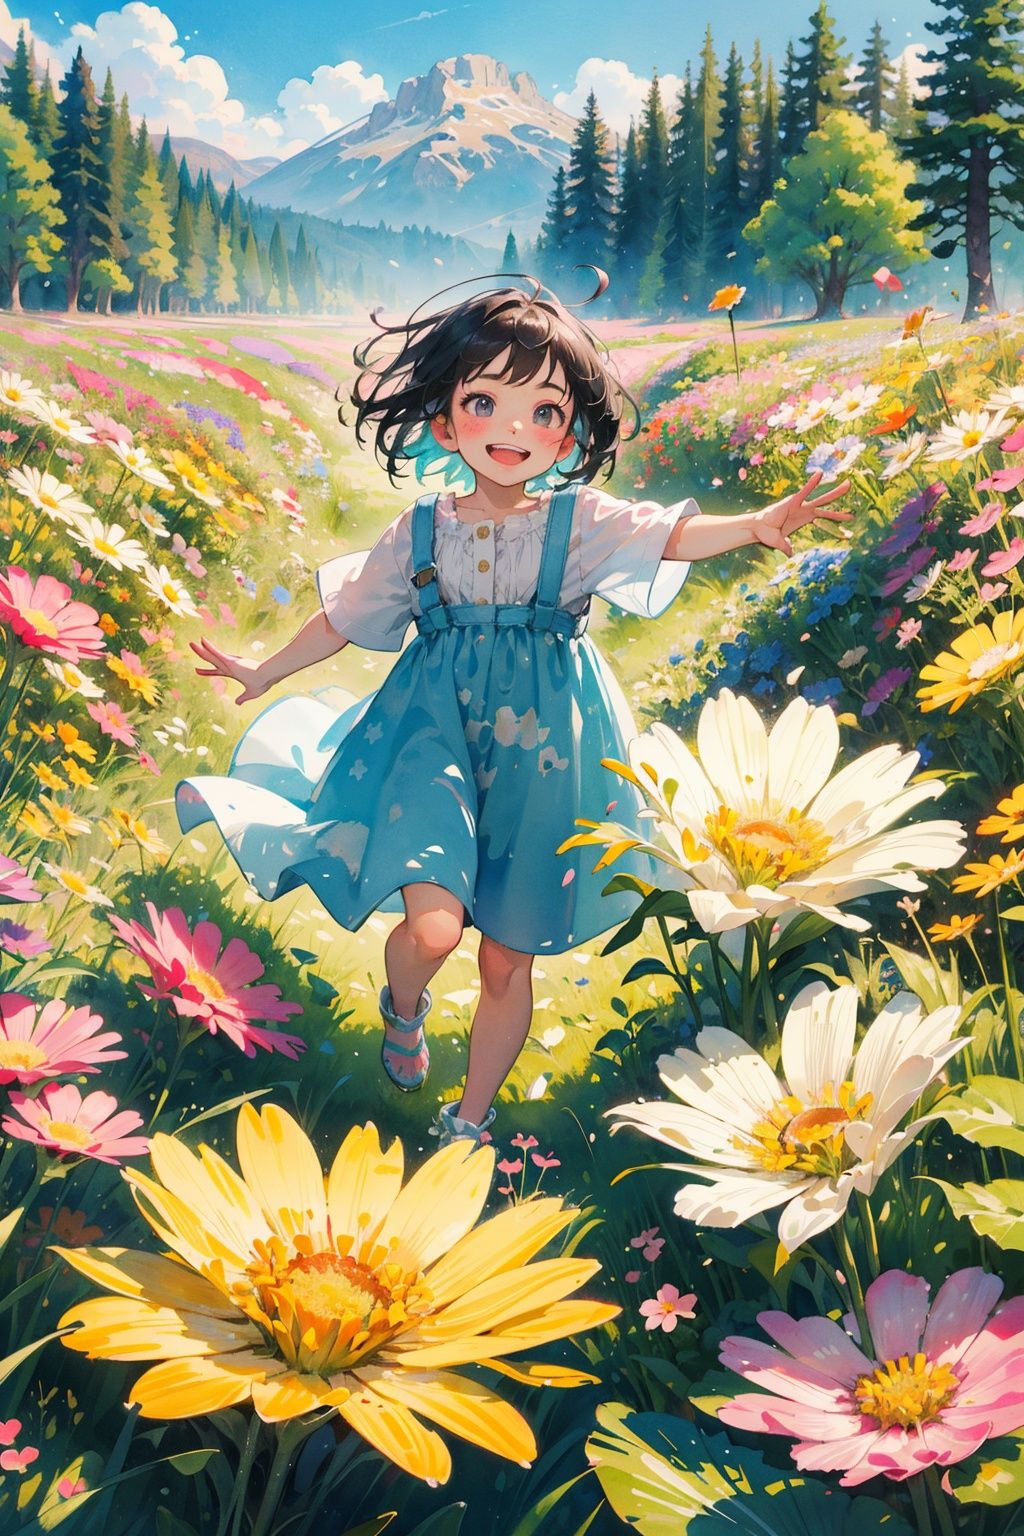  Best quality,8k,cg,
absurdres,incredibly absurdres,masterpiece,best quality,1girl,1boy,child,detail light,small animals,in spring,nature,action,kawaii,in a meadow,full-blown flowers,whole family,love,friend,play,lively,watercolor,happy,smiling,HS,